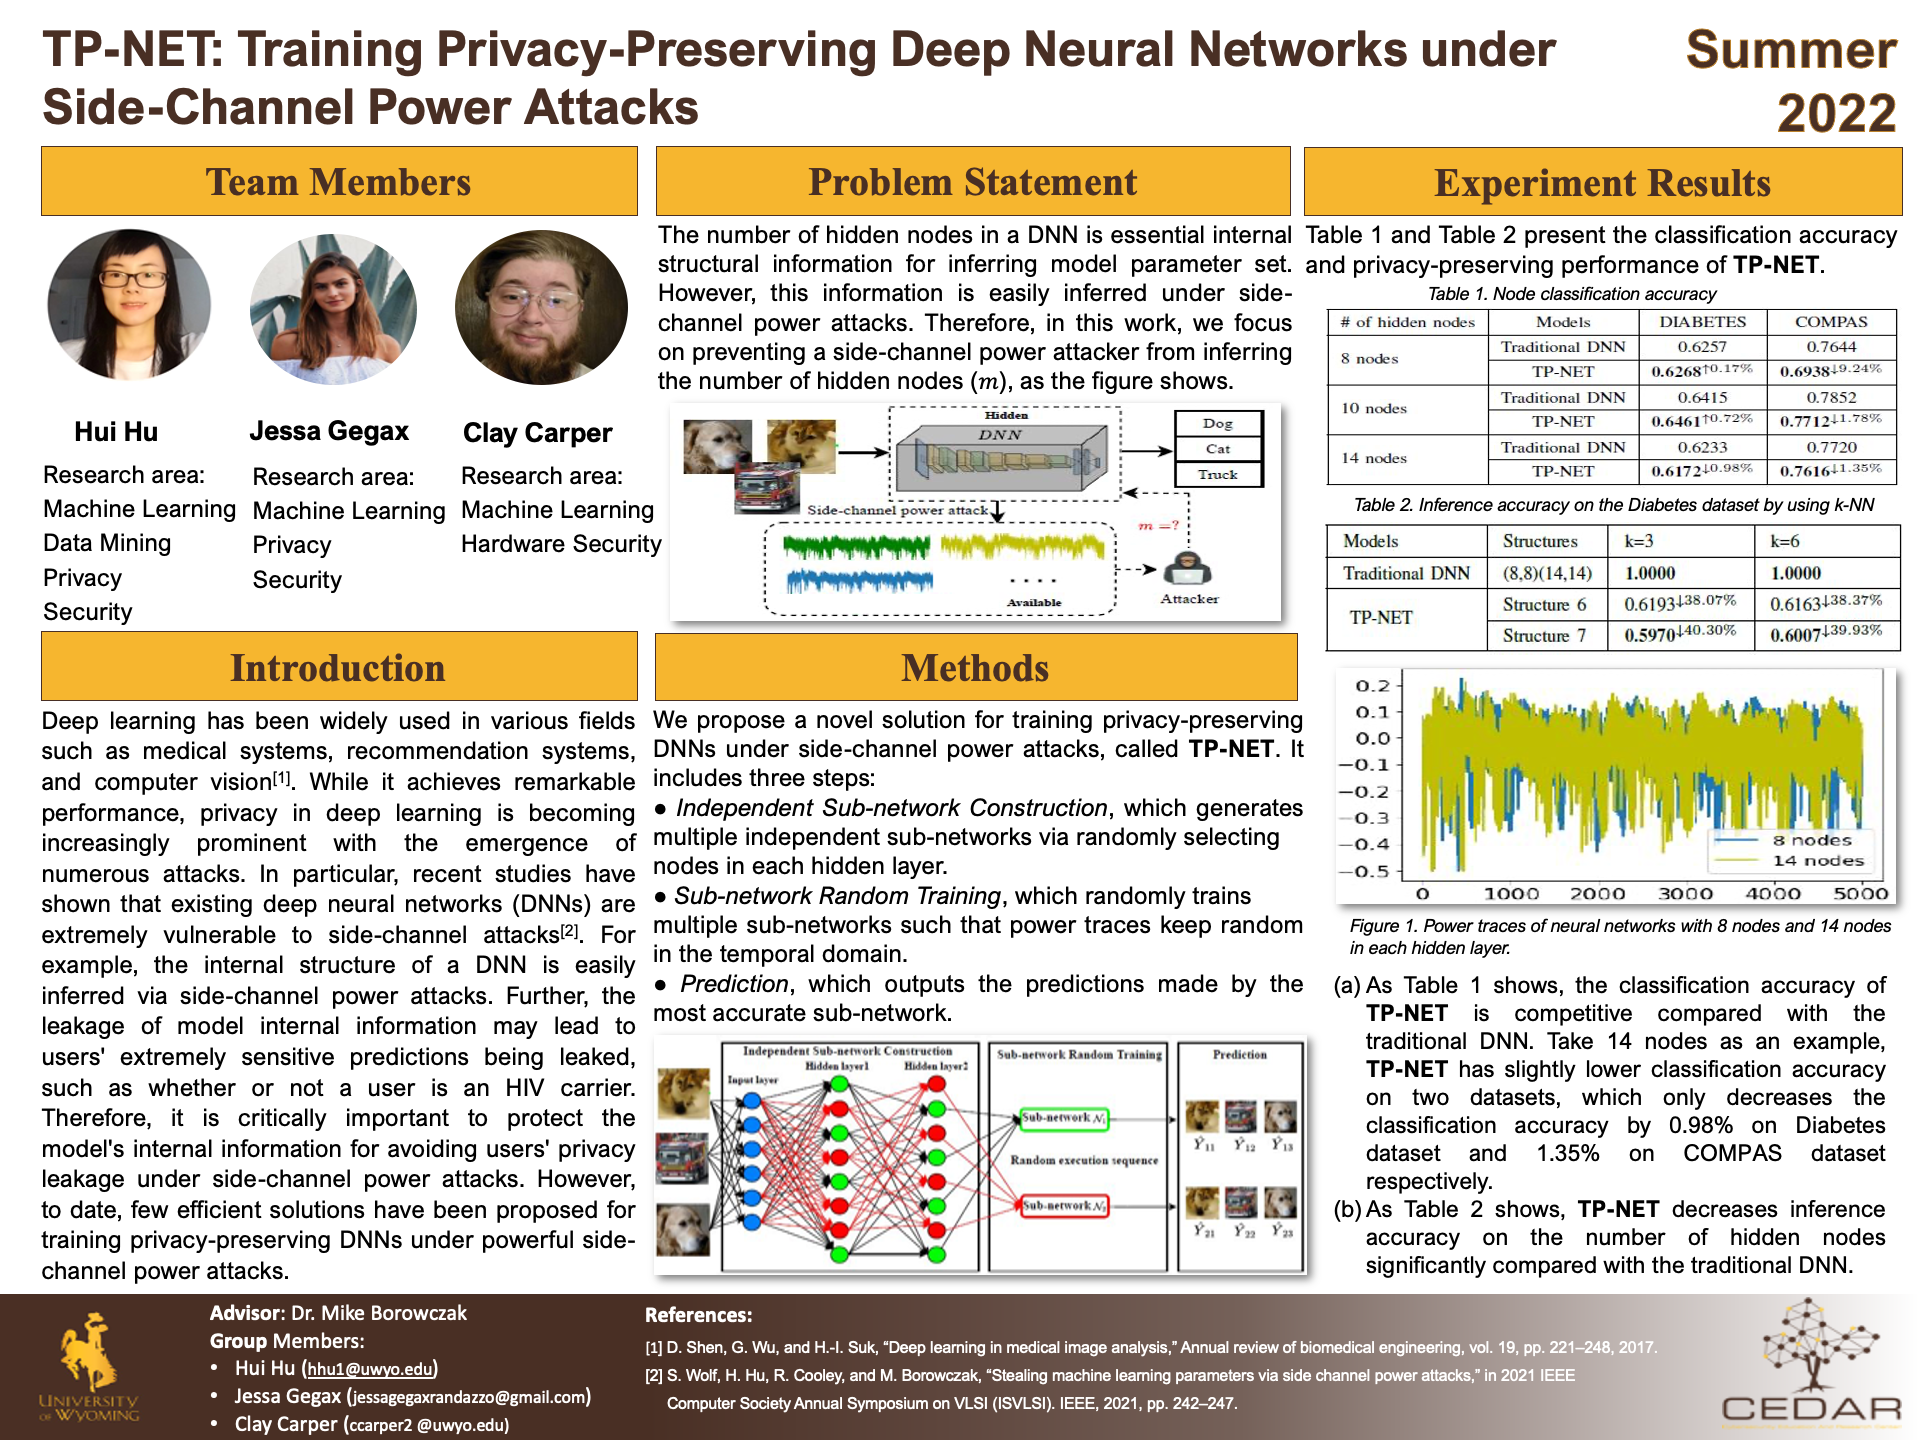  Poster for TP-Net: Training Privacy-Preserving Deep Neural Networks Under Side-Channel Power Attacks